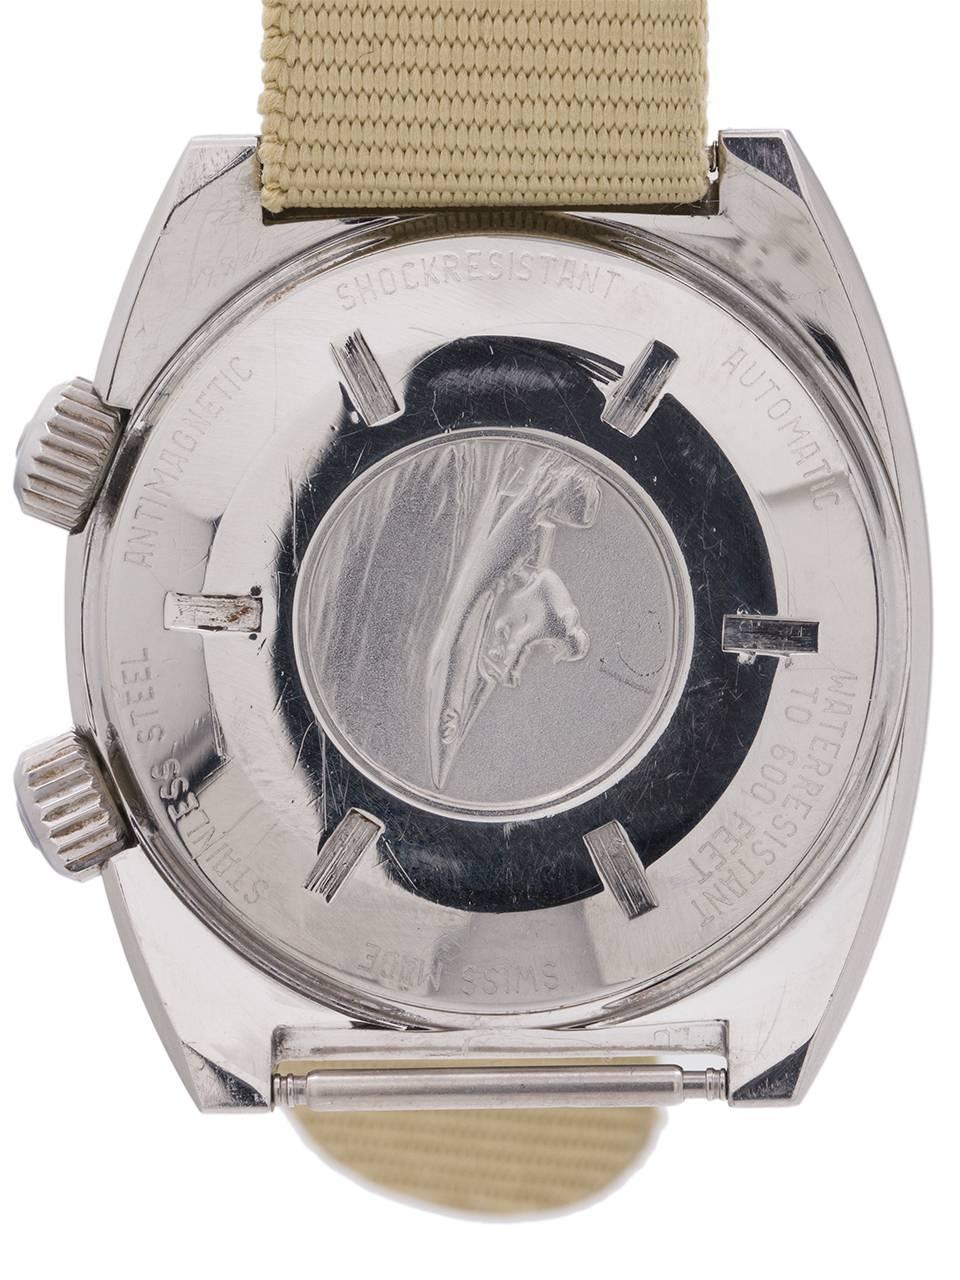 Men's Baylor Stainless Steel Diver Date automatic wristwatch, circa 1970